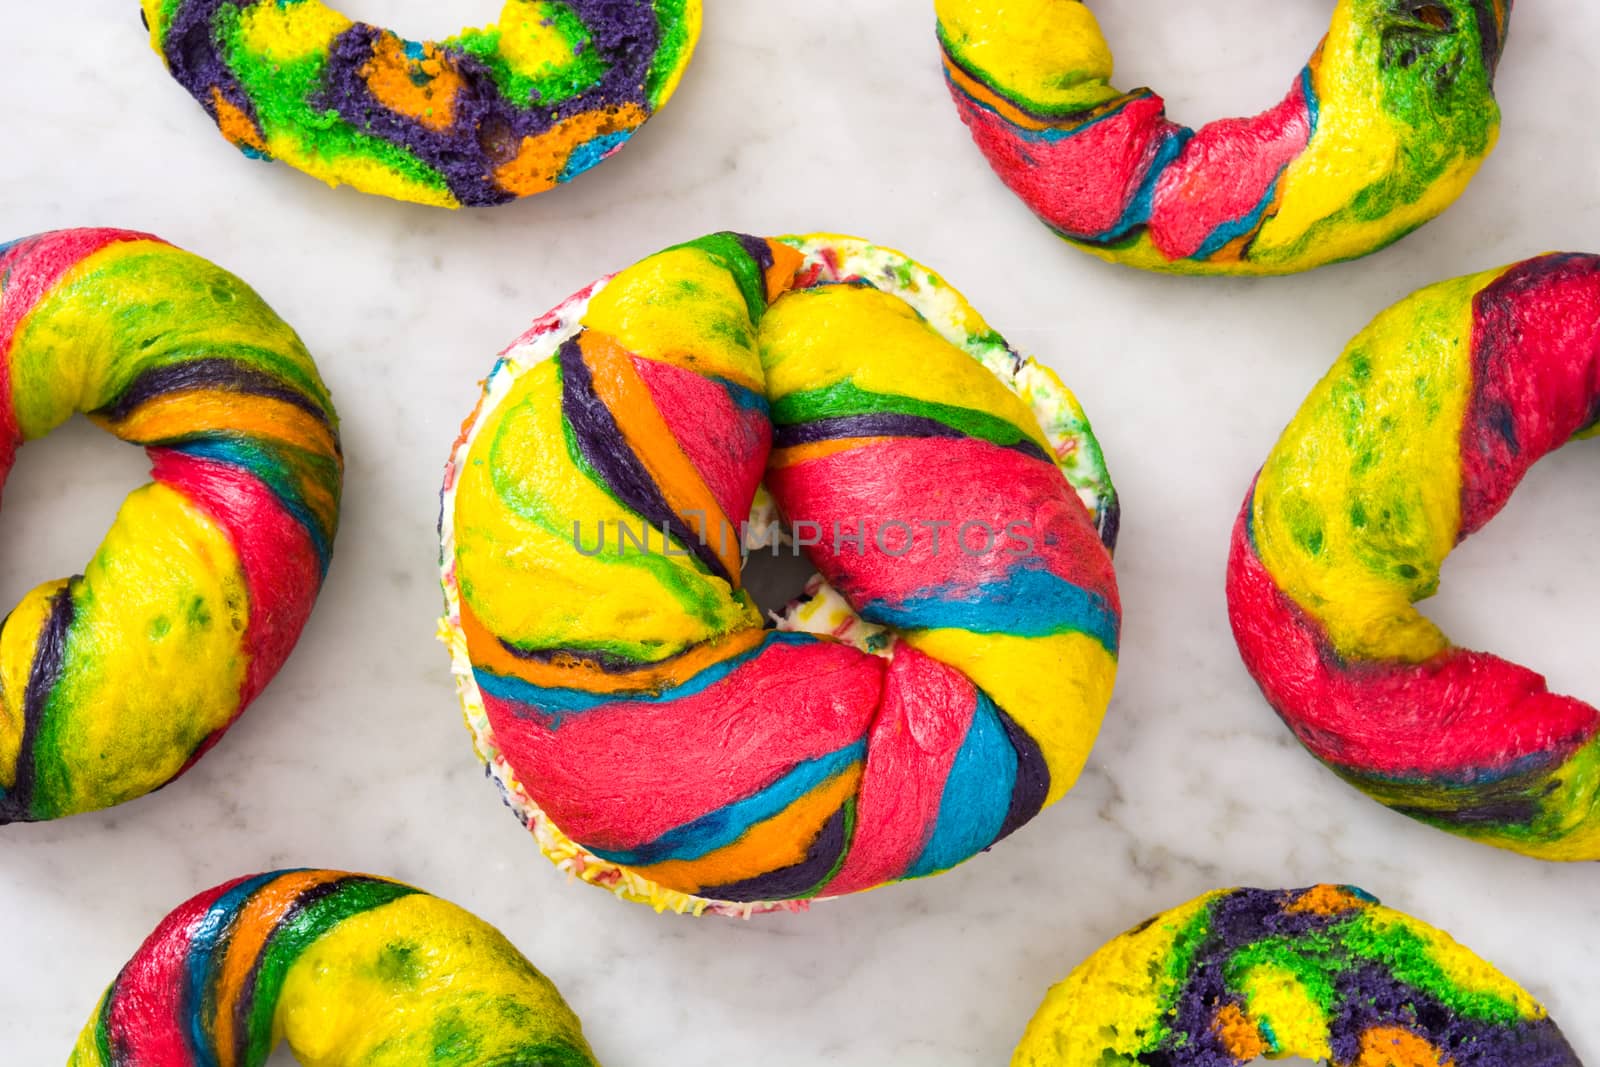 Colorful bagel with cheese and sprinkles on marble by chandlervid85